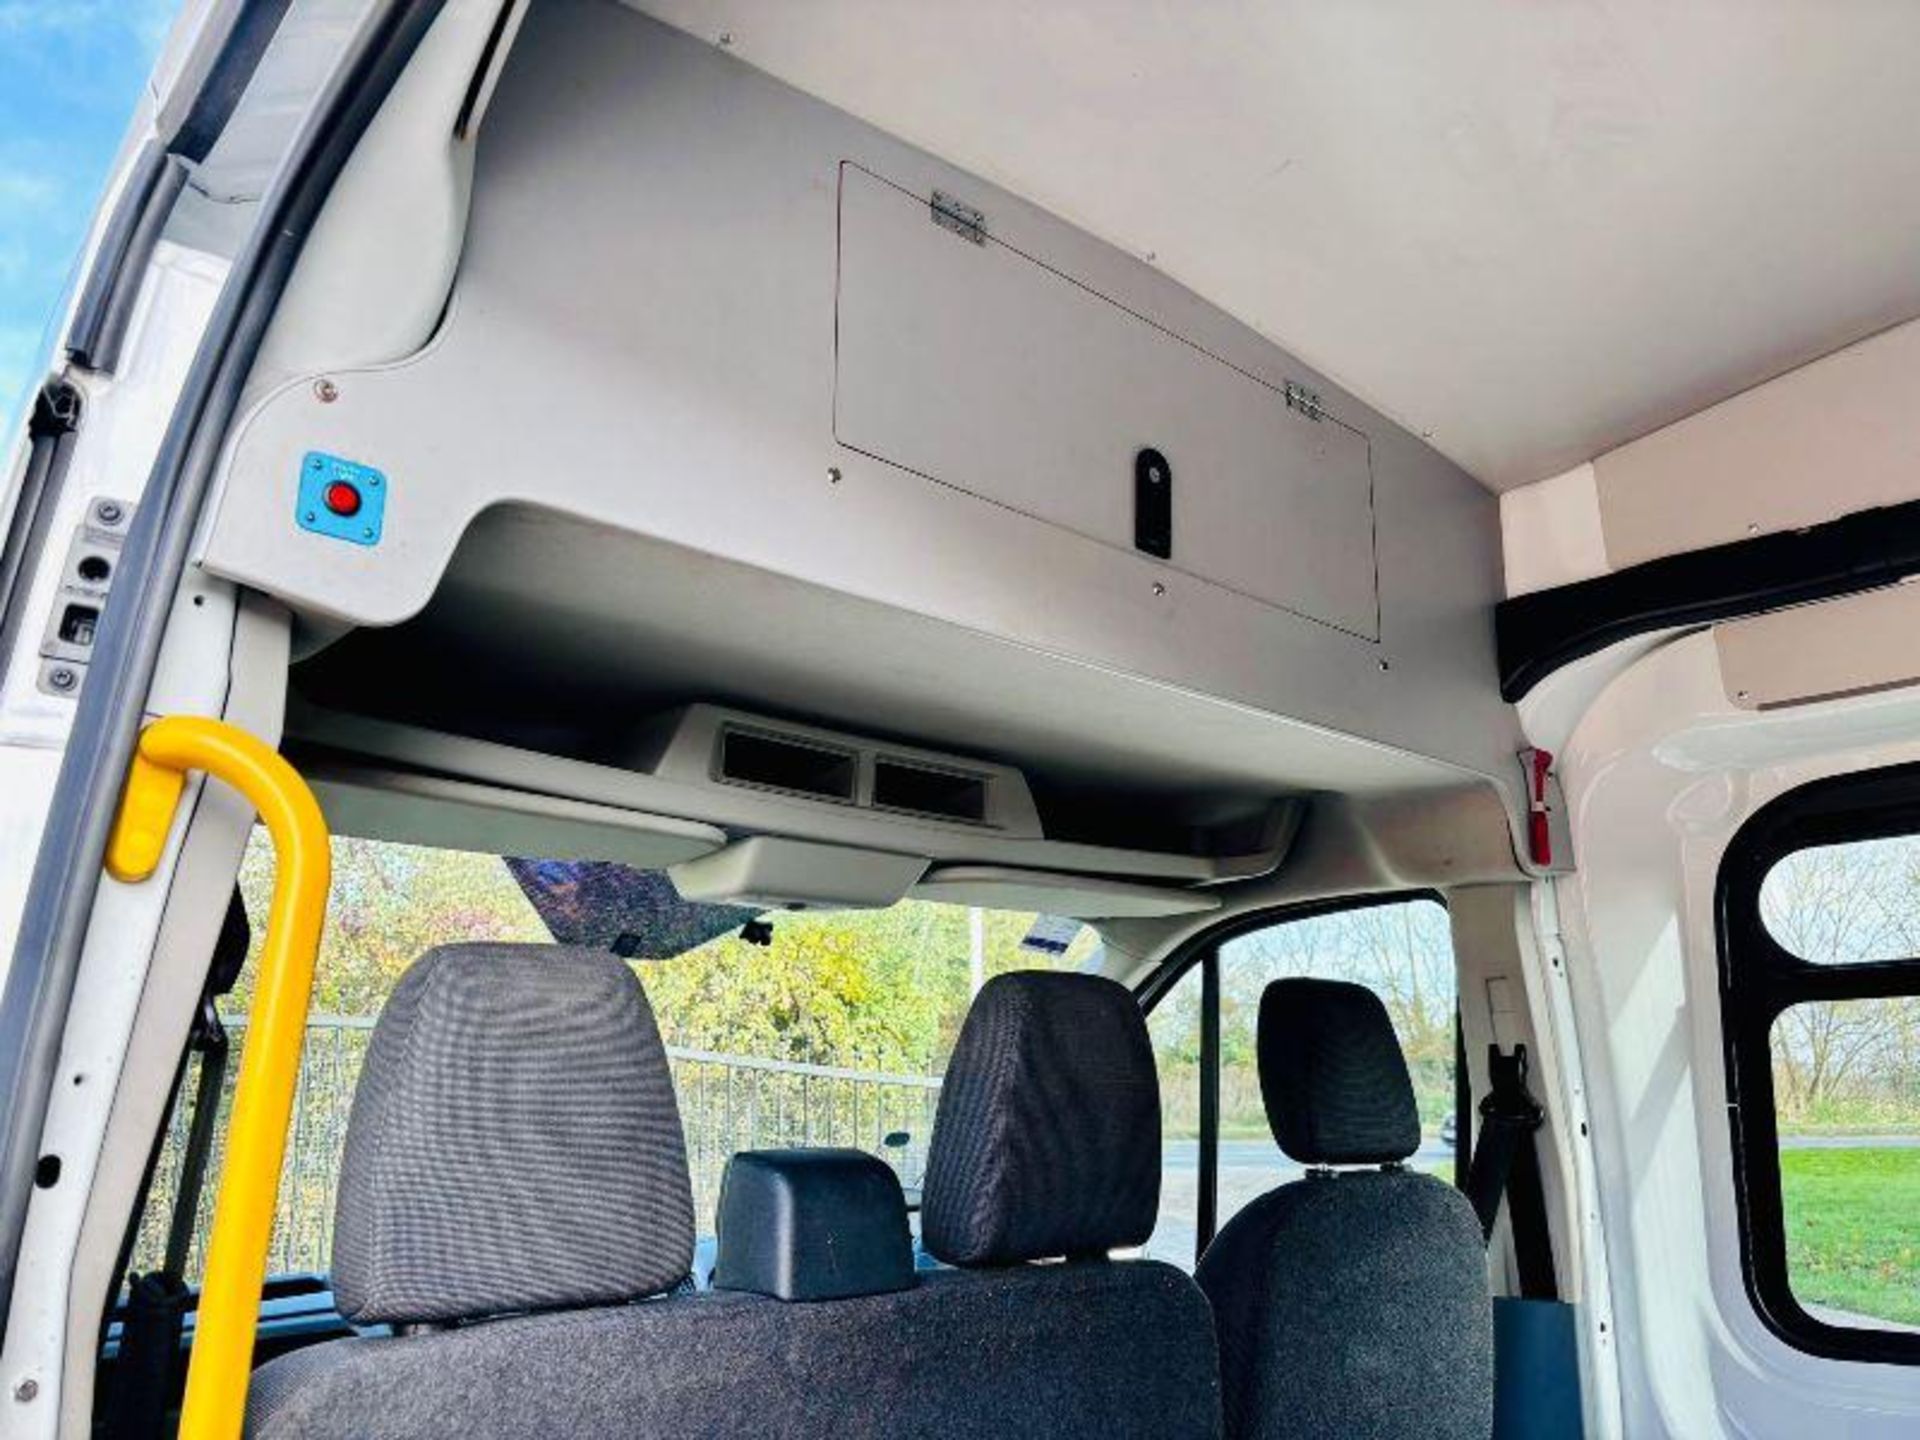 2019 FORD TRANSIT 350 CREW VAN - BLUETOOTH - HANDS FREE - USB POINT. - Image 8 of 18